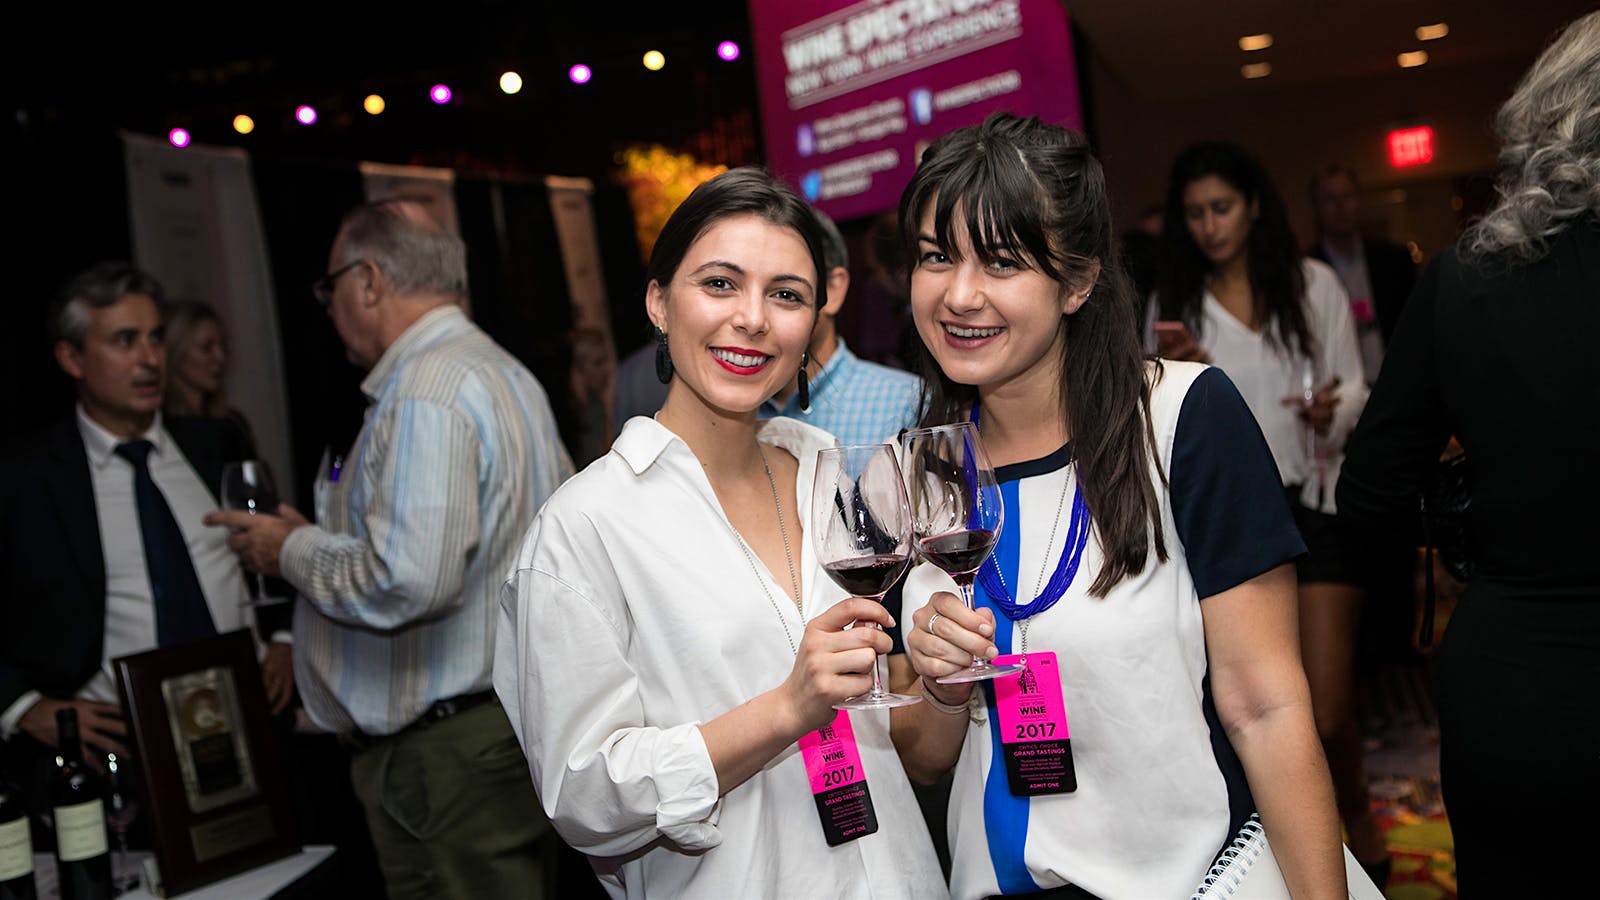 The 2017 New York Wine Experience: Wine and Friendship Stand Strong